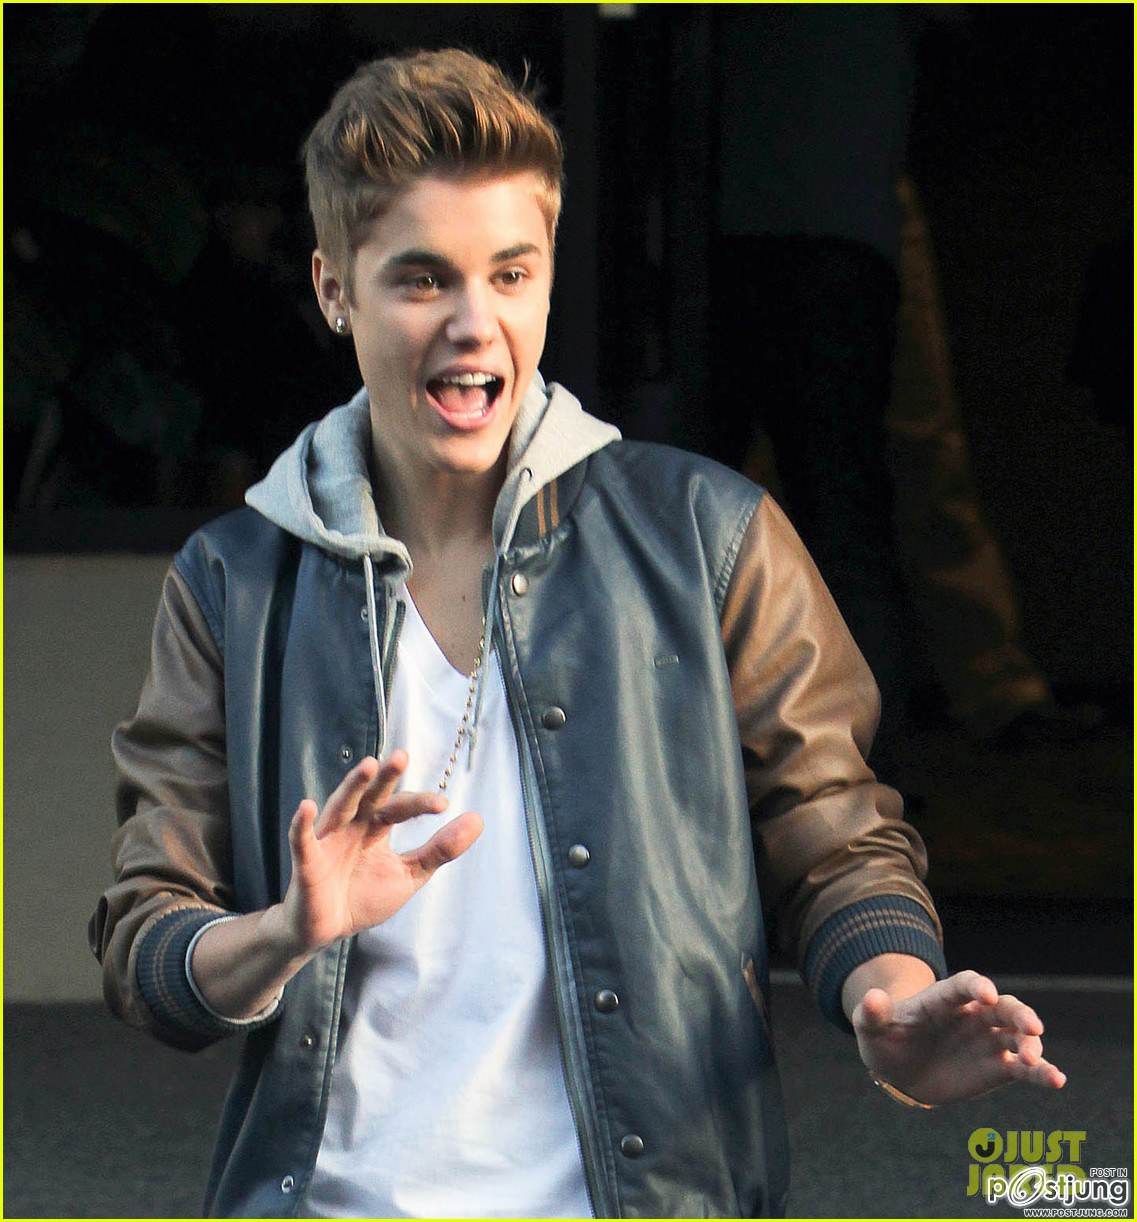 Justin Bieber is all smiles as he steps out of his hotel for a surprise meet and greet on Friday (Ju